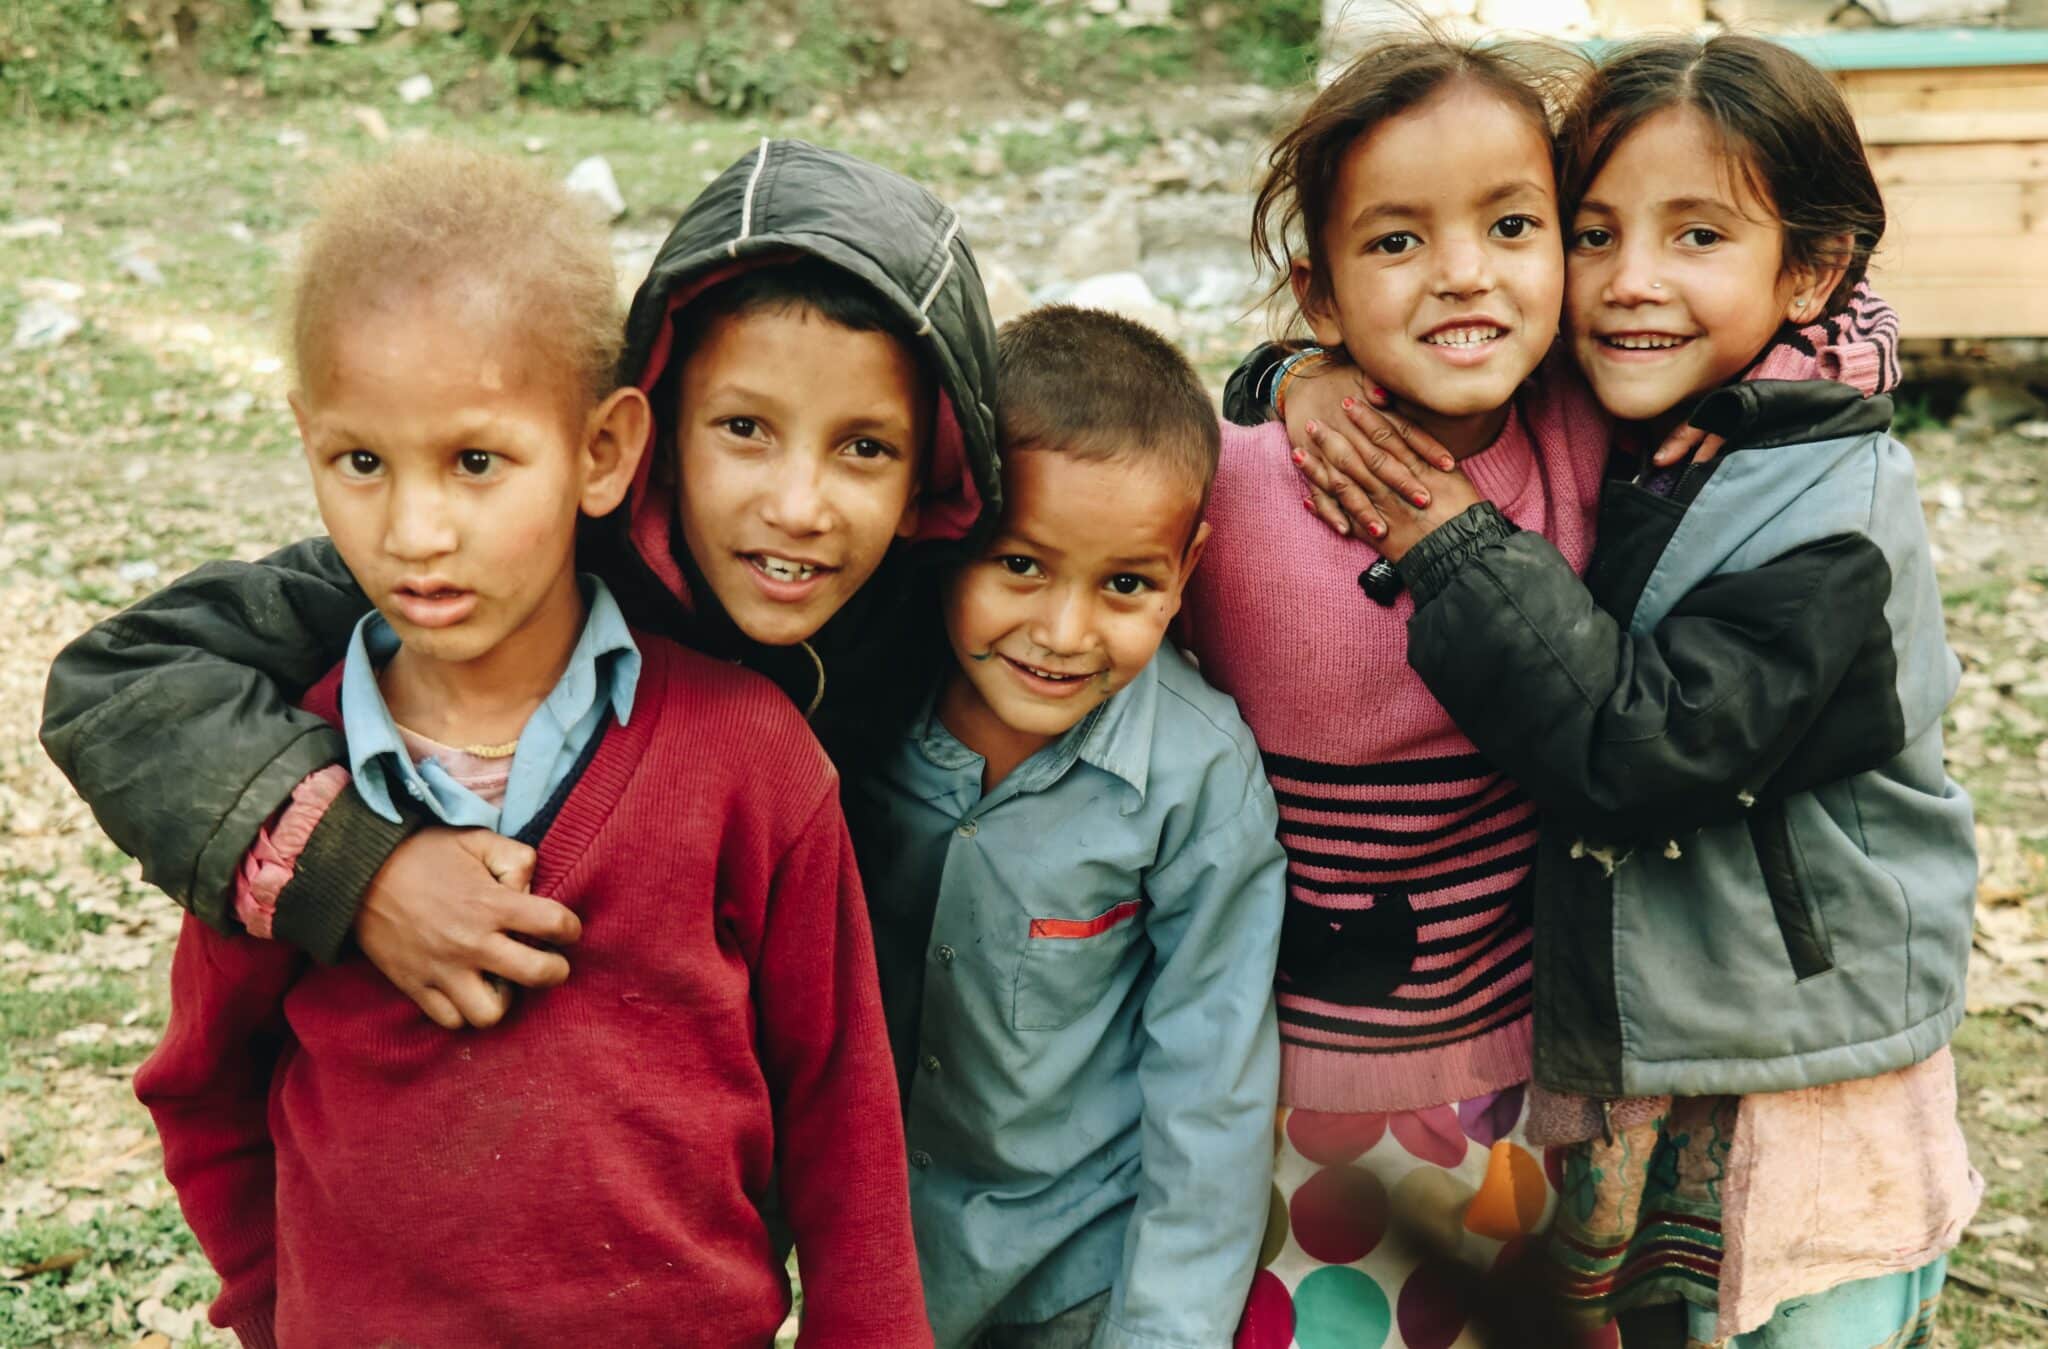 I recently went for Sarpass trek in Himachal Pradesh (India) and found these cute kids at the first base camp called Grahan. When asked they told me they were siblings and they love their life out of the city chaos. They were happy, as the picture shows.